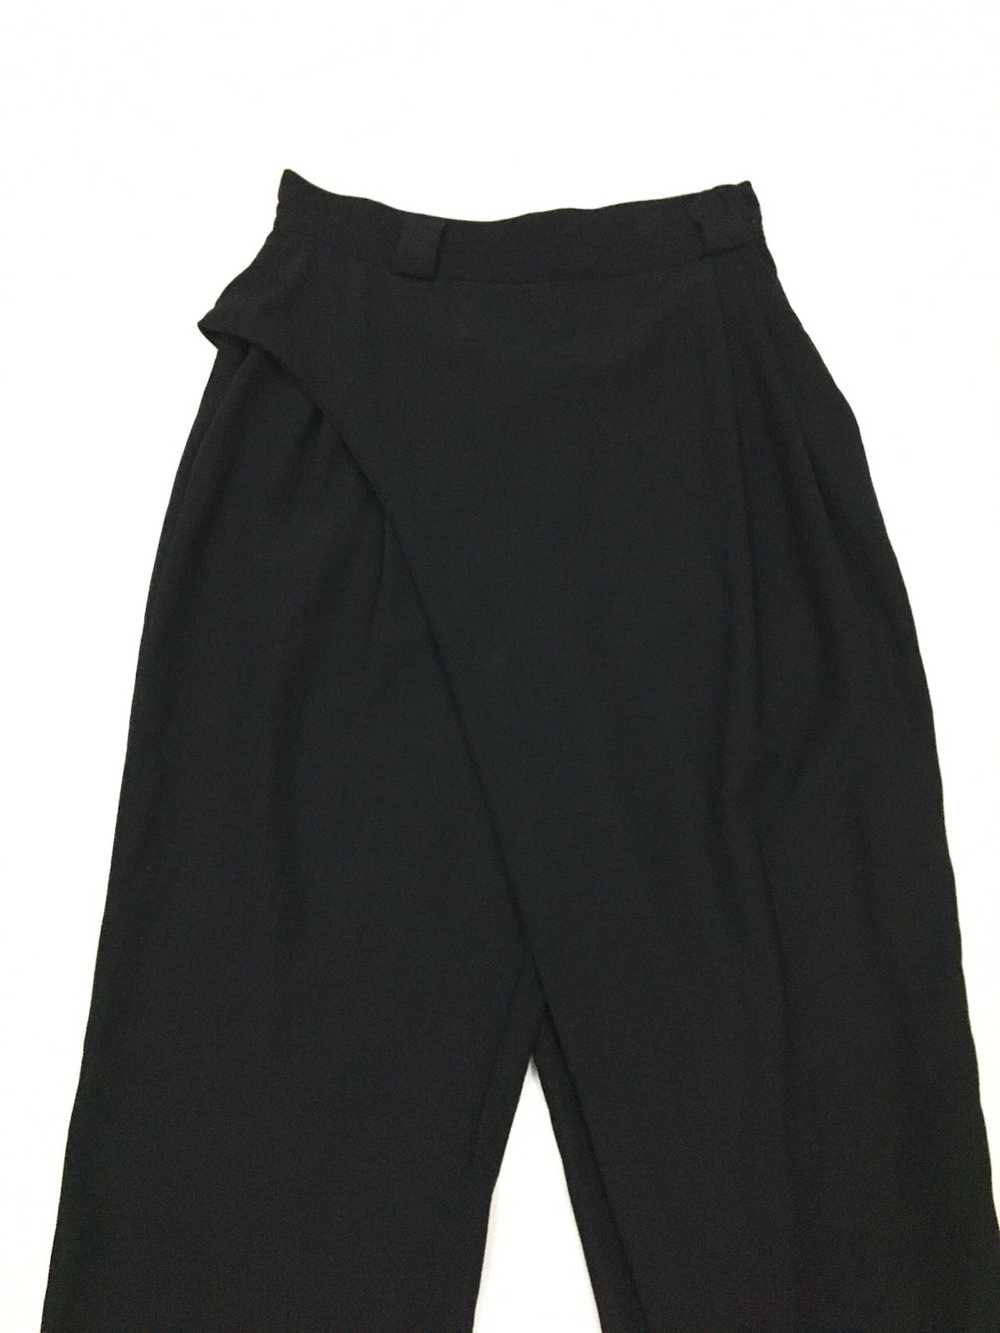 Versace Archive Assymetrical Wool Pants - image 2